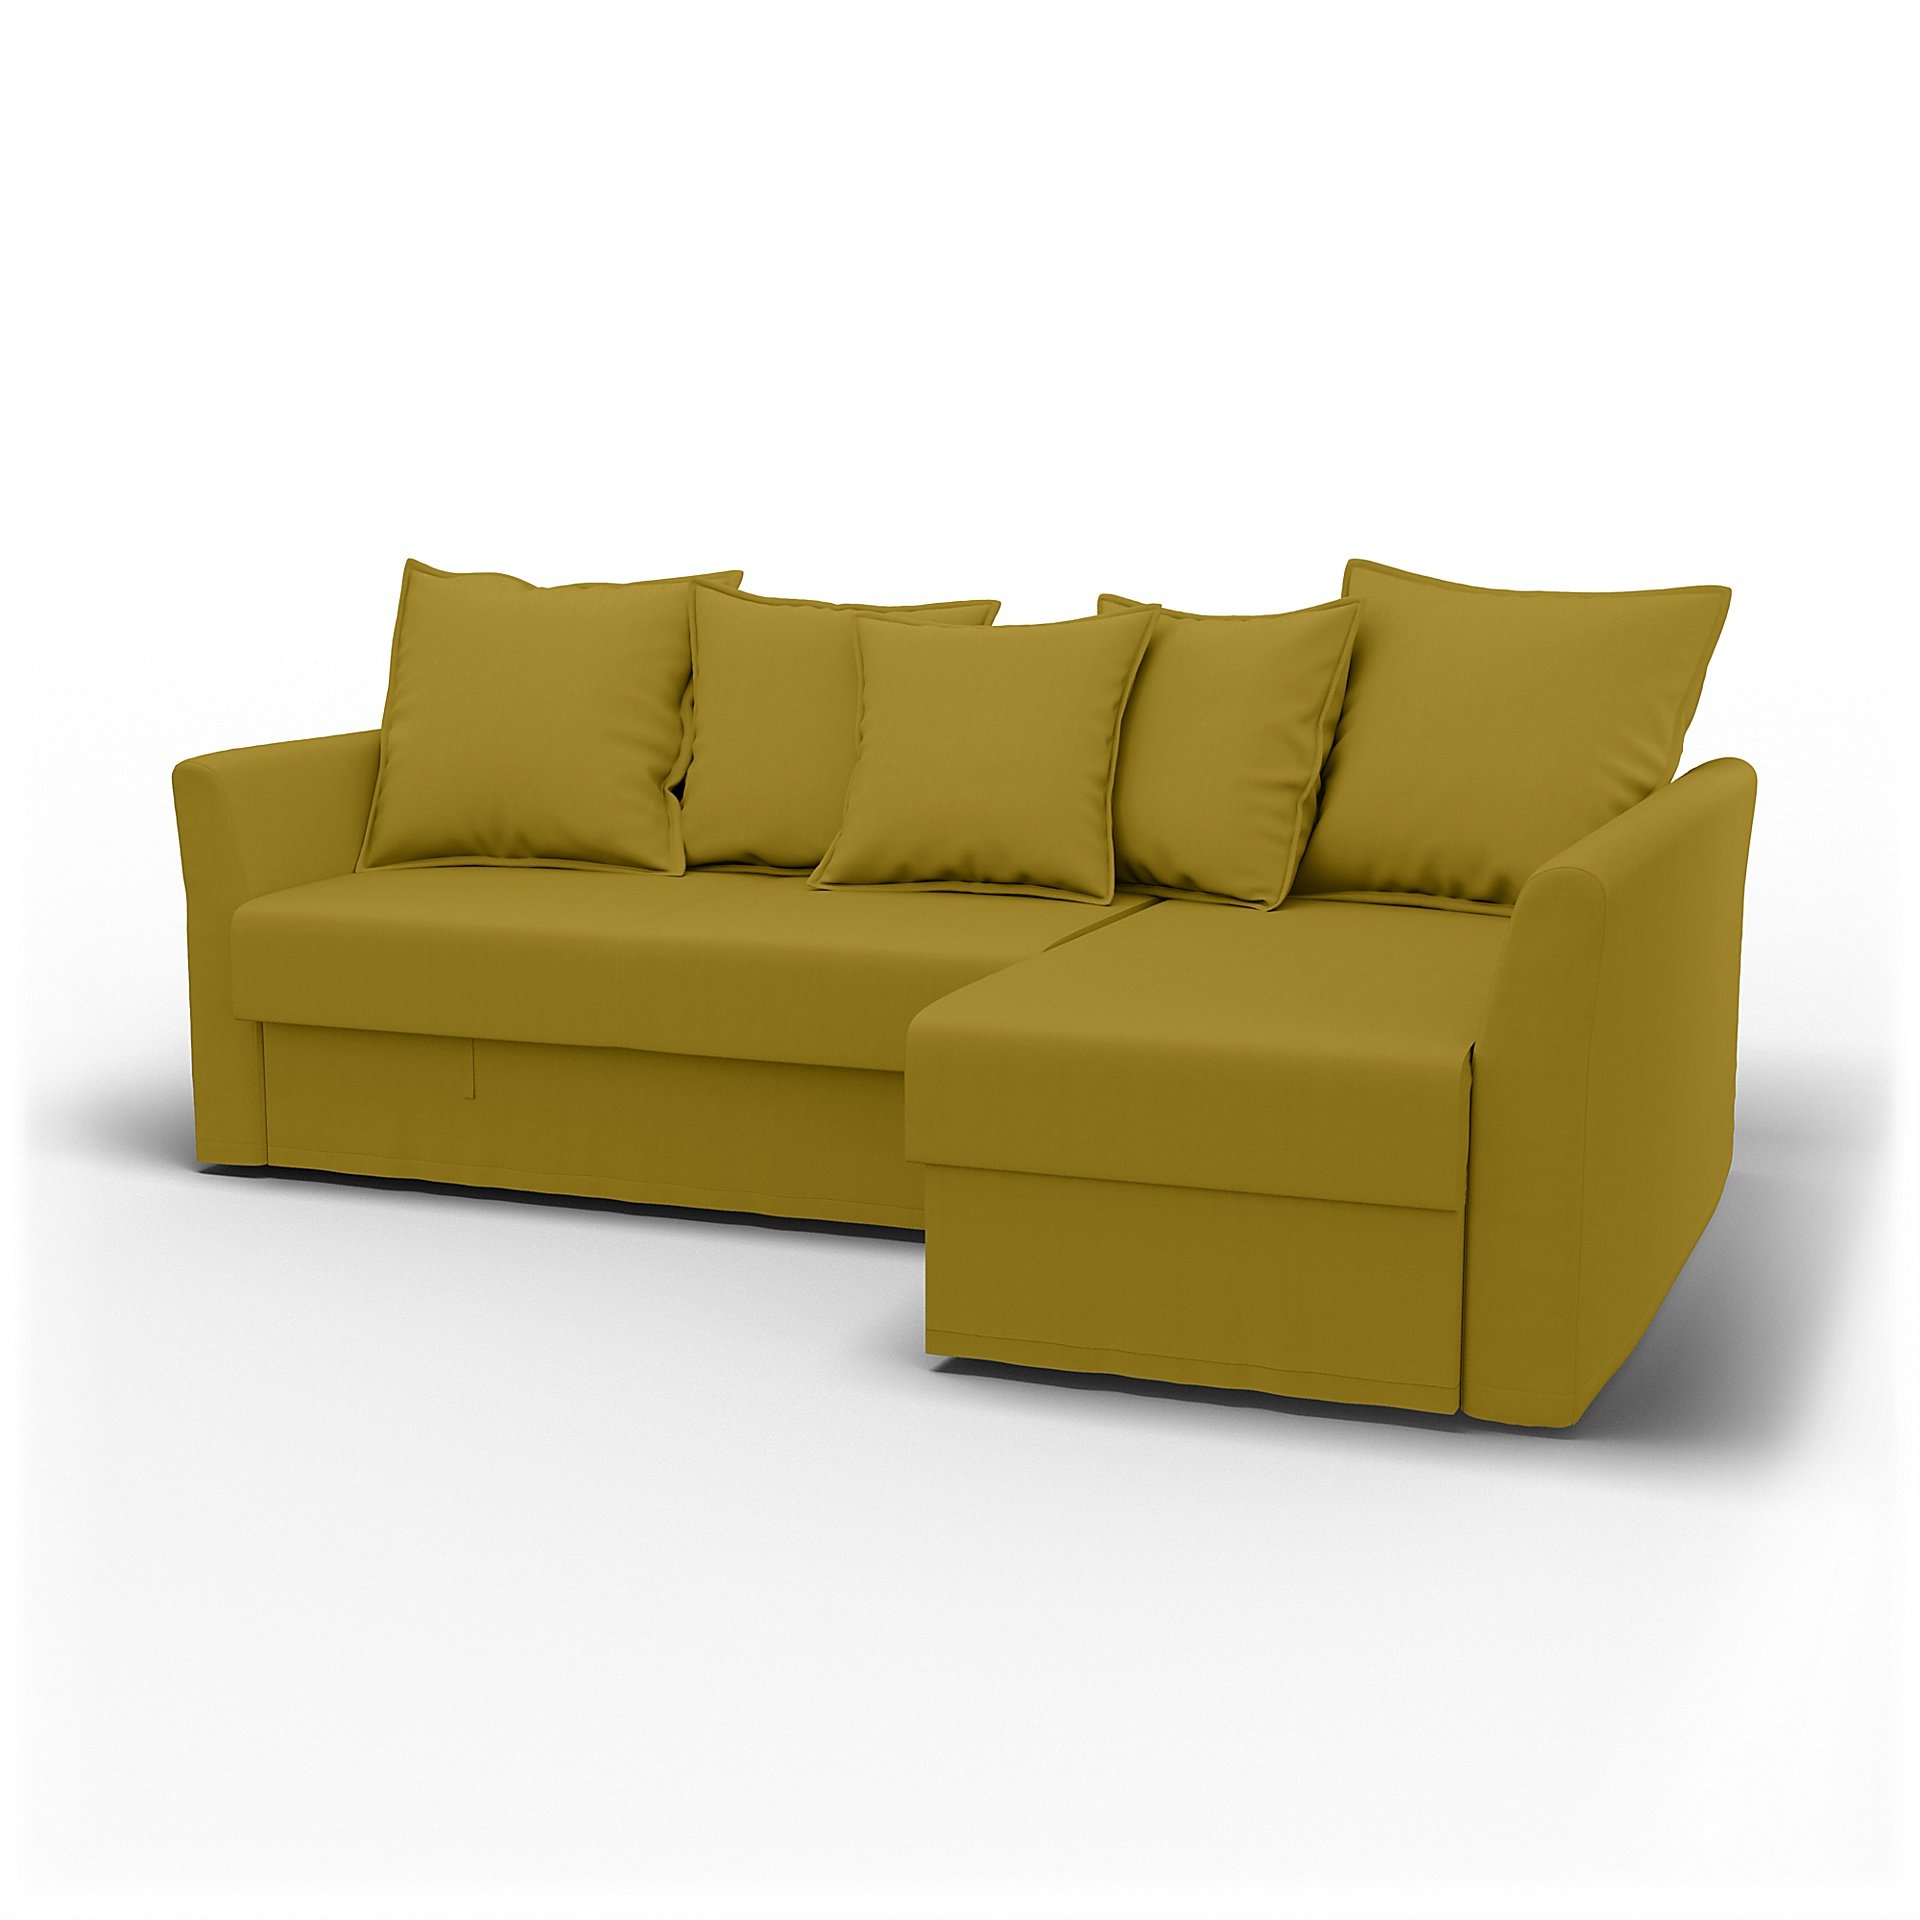 IKEA - Holmsund Sofabed with Chaiselongue, Olive Oil, Cotton - Bemz